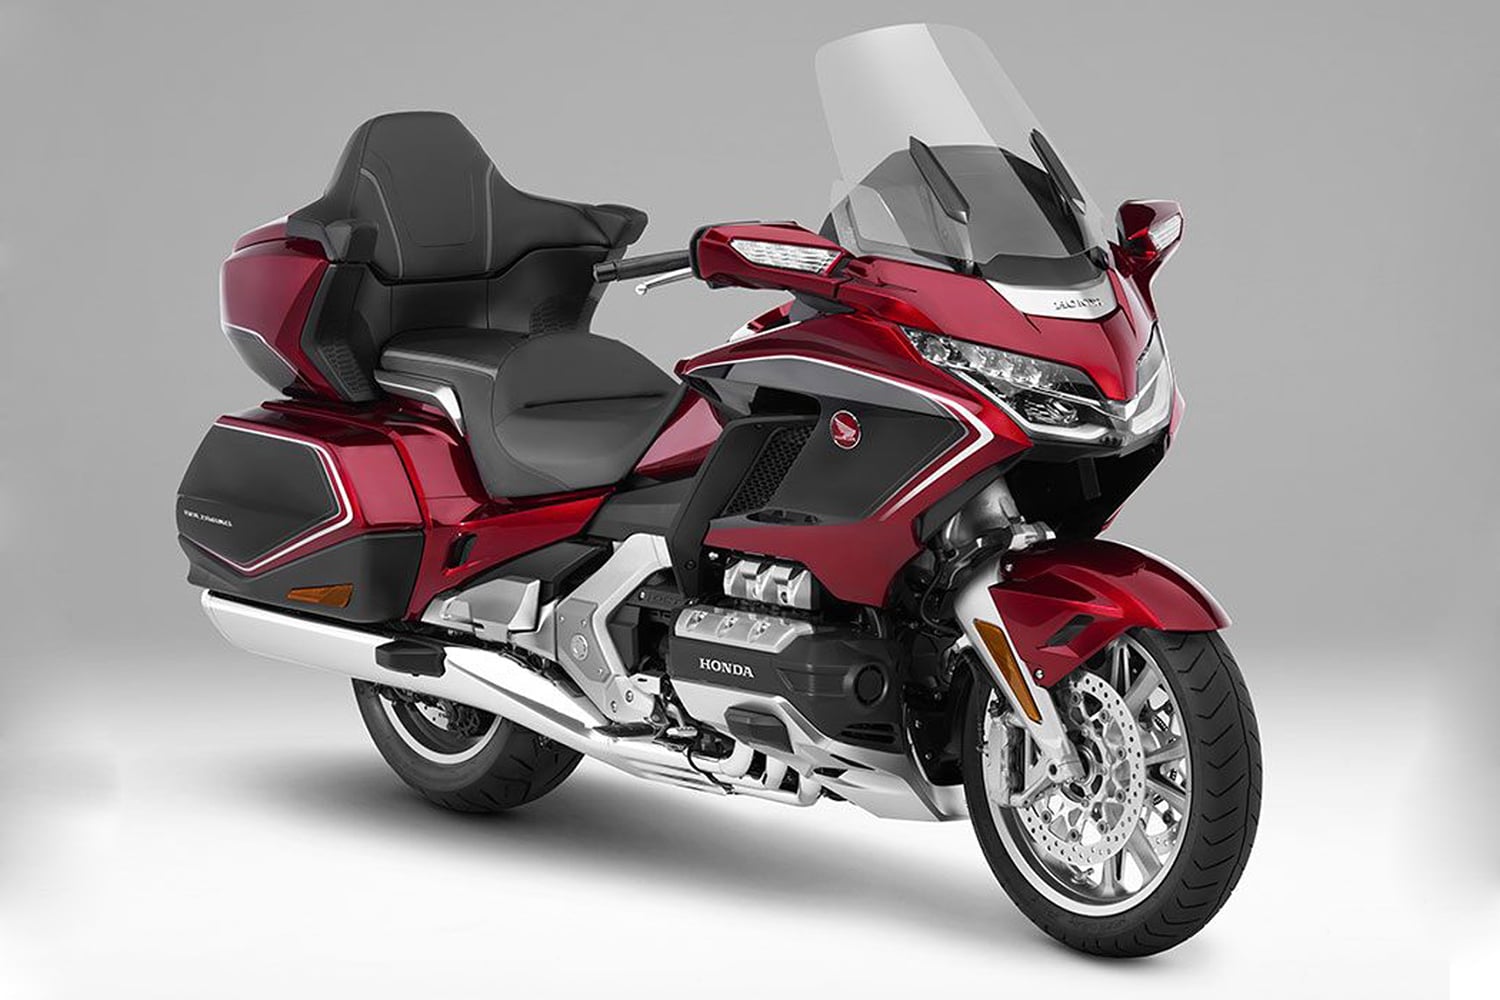 Honda Gold Wing motorcycle gains integration with Android Auto.